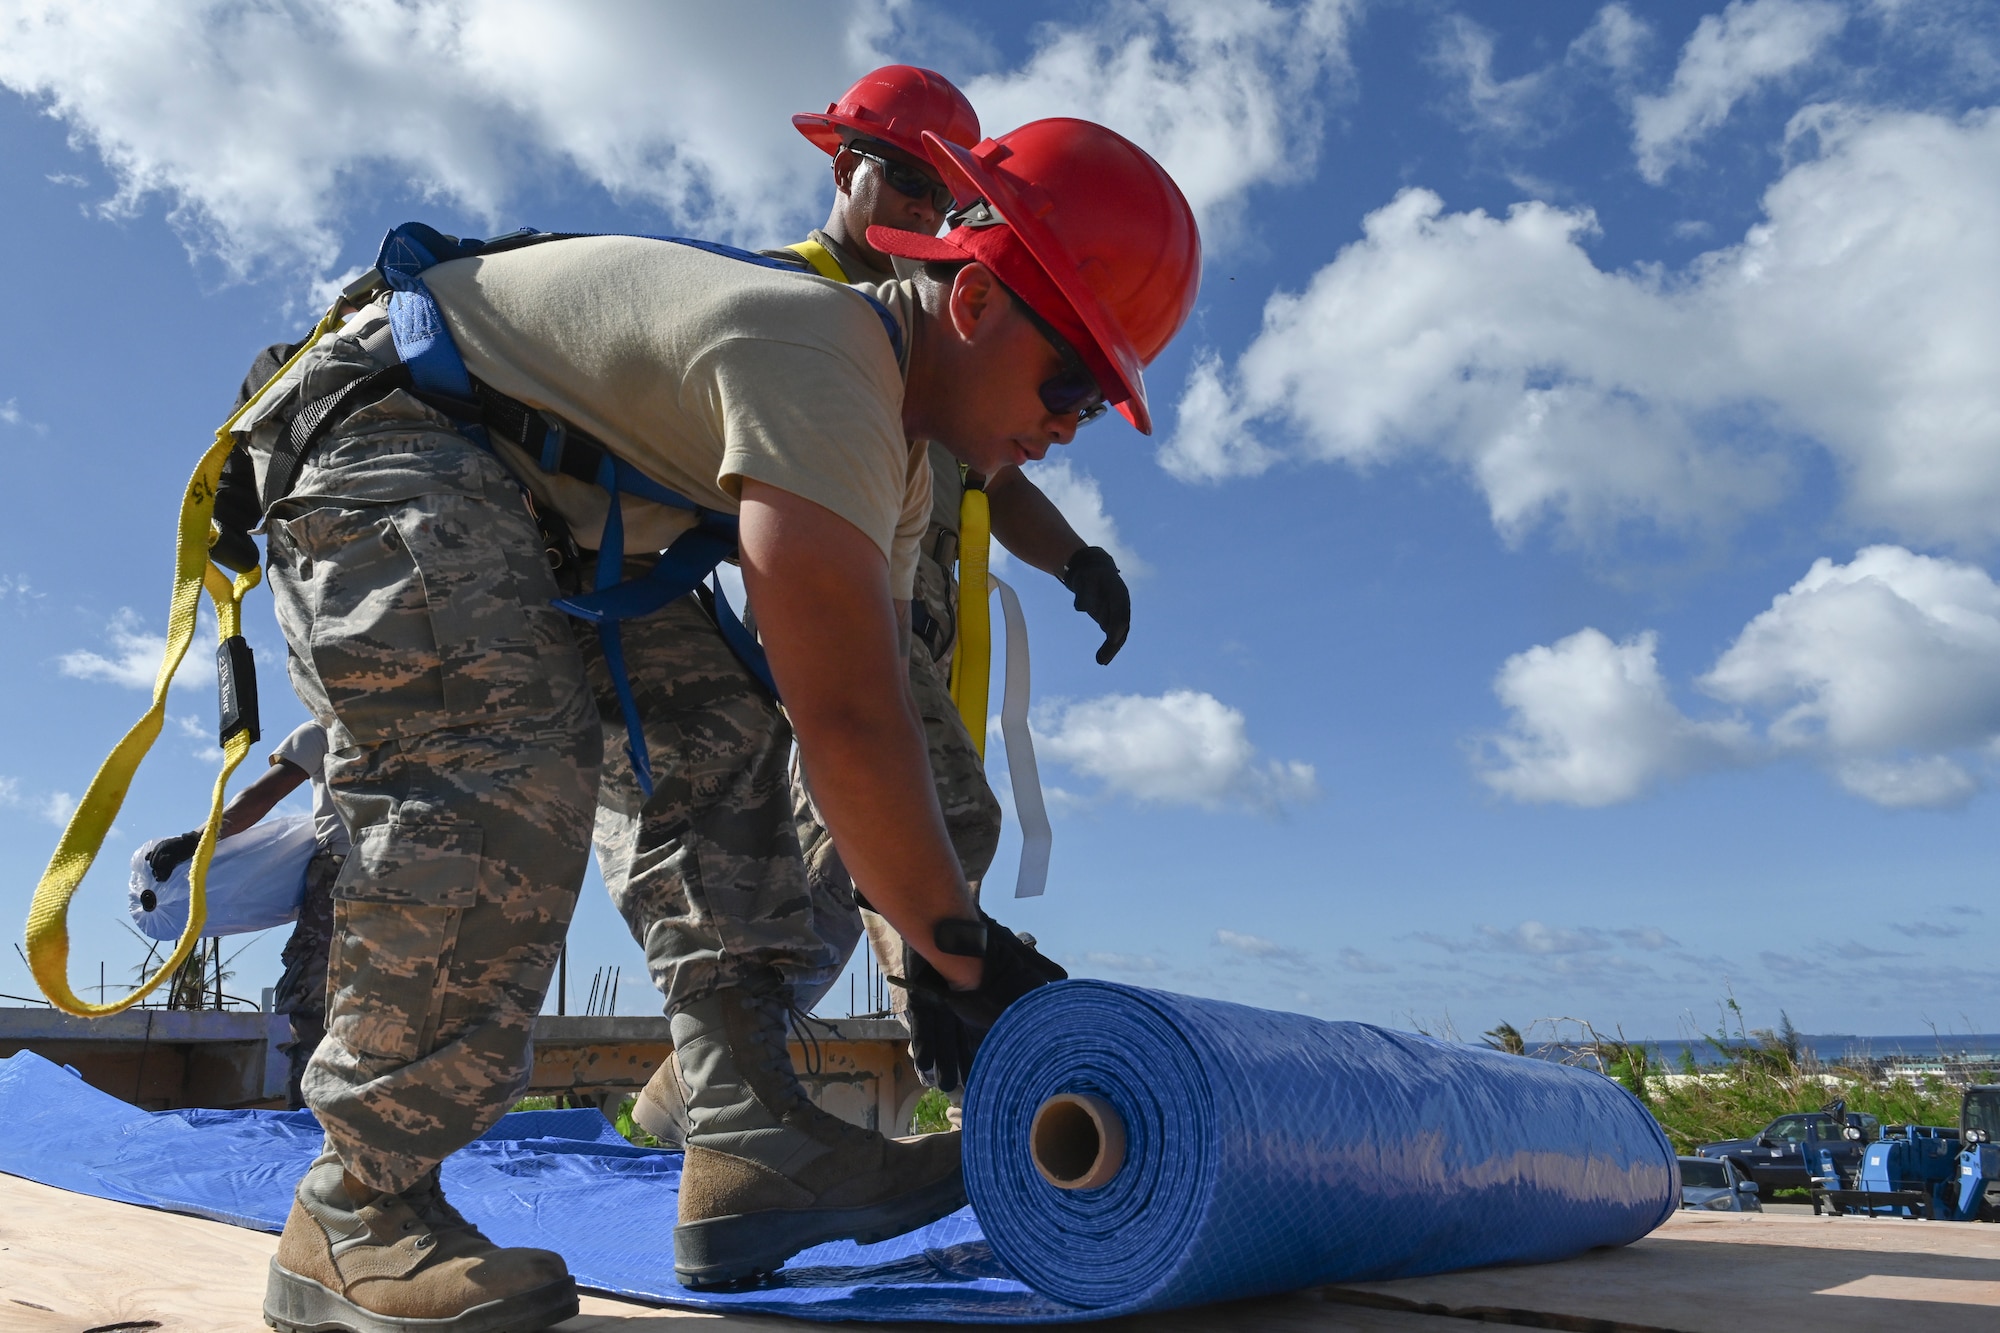 Senior Airman Jerome Solivar, 254th Rapid Engineer Deployable Heavy Operational Repair Squadron Engineers structural journeyman rolls out a tarp to help build a new roof for a home damaged by Super Typhoon Yutu, in the village of Koblerville, Saipan, Commonwealth of Northern Mariana Islands, Nov. 20, 2018.